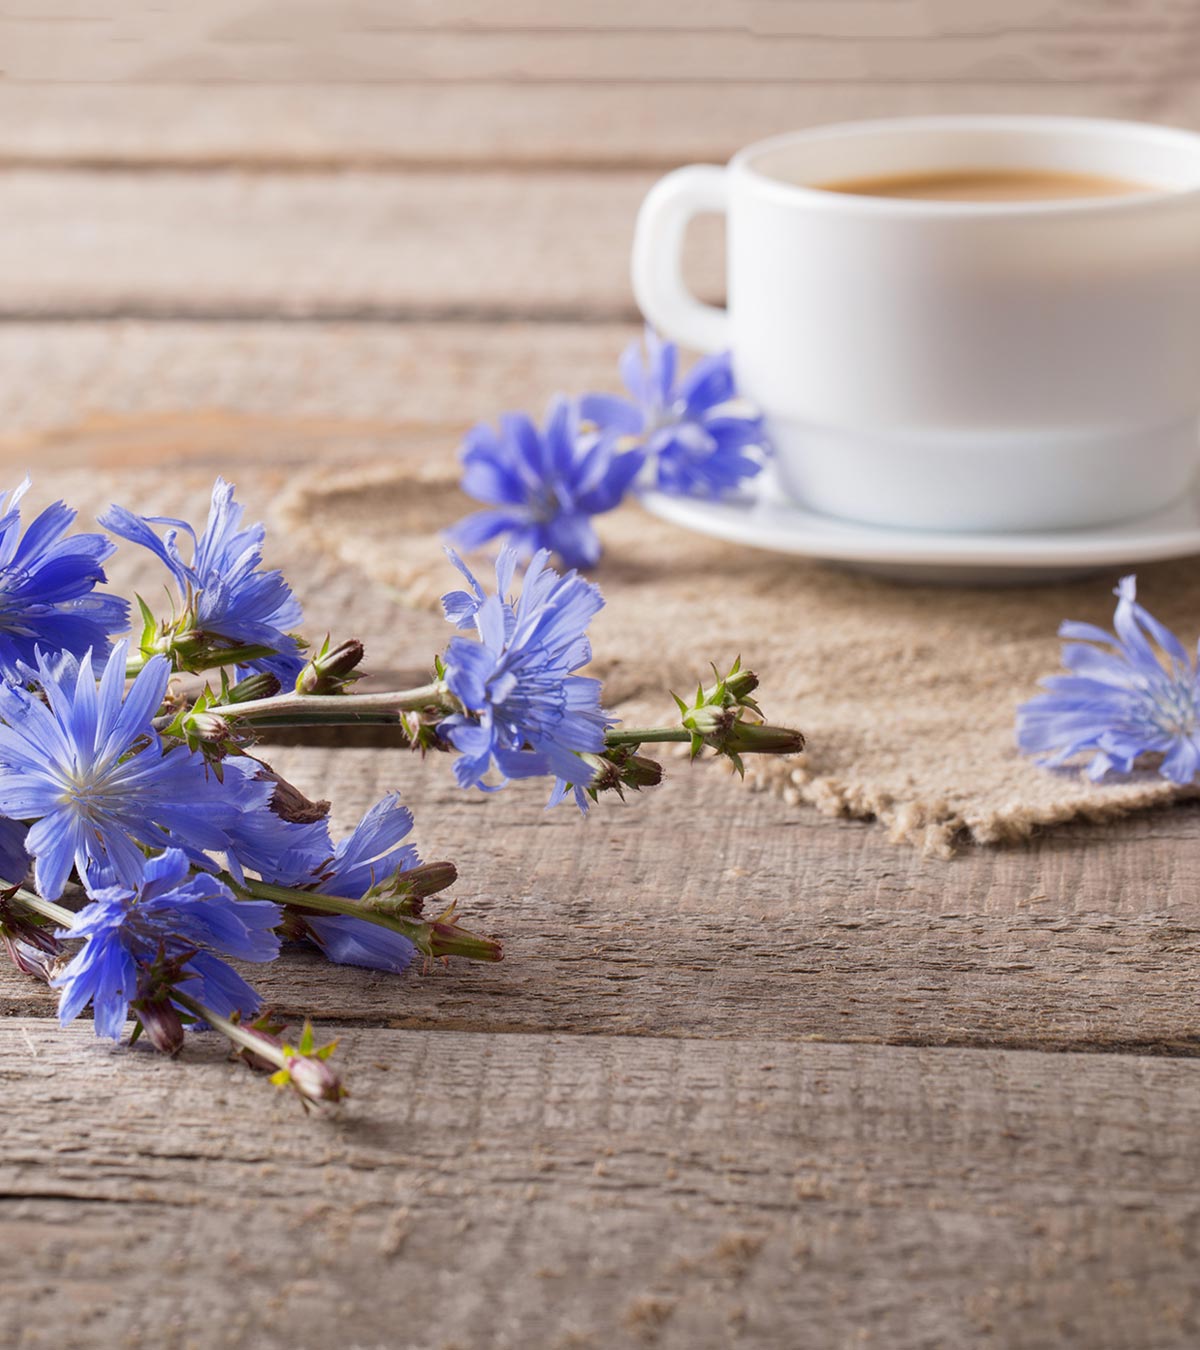 Is It Safe To Eat Chicory During Pregnancy?